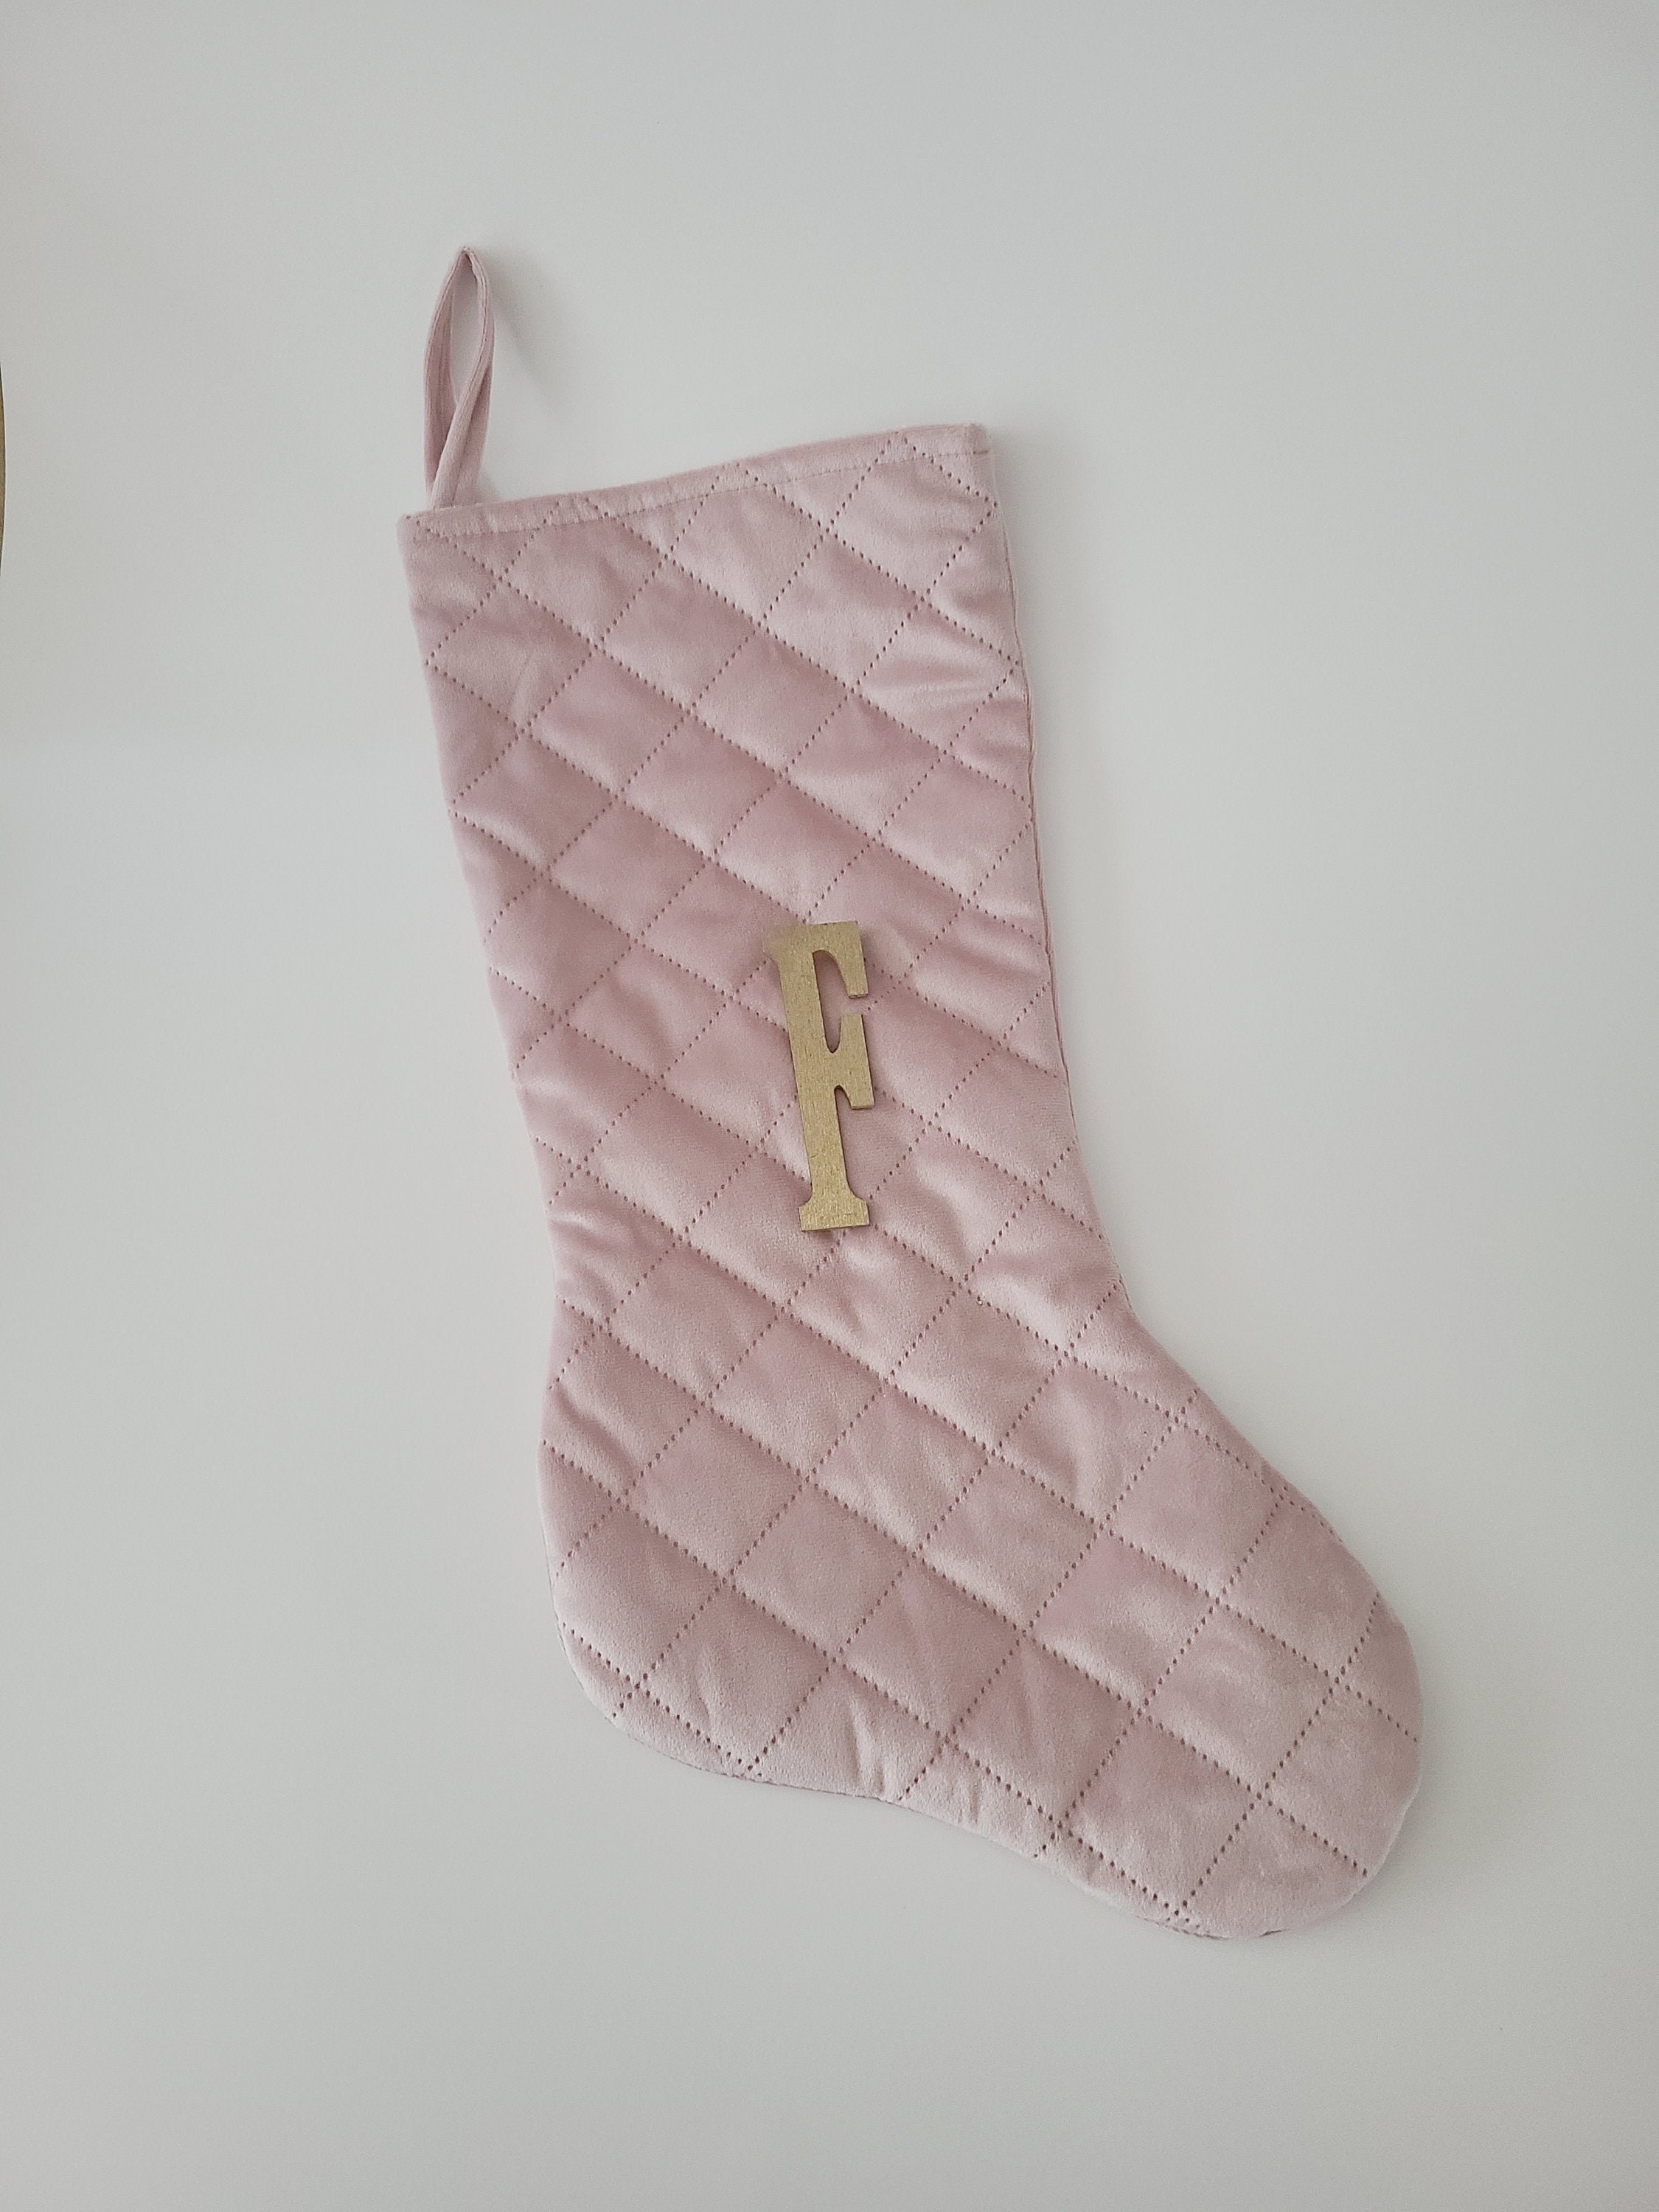 Sale Dusty Mauve Pink Quilted Stocking Dusty Rose Blush 